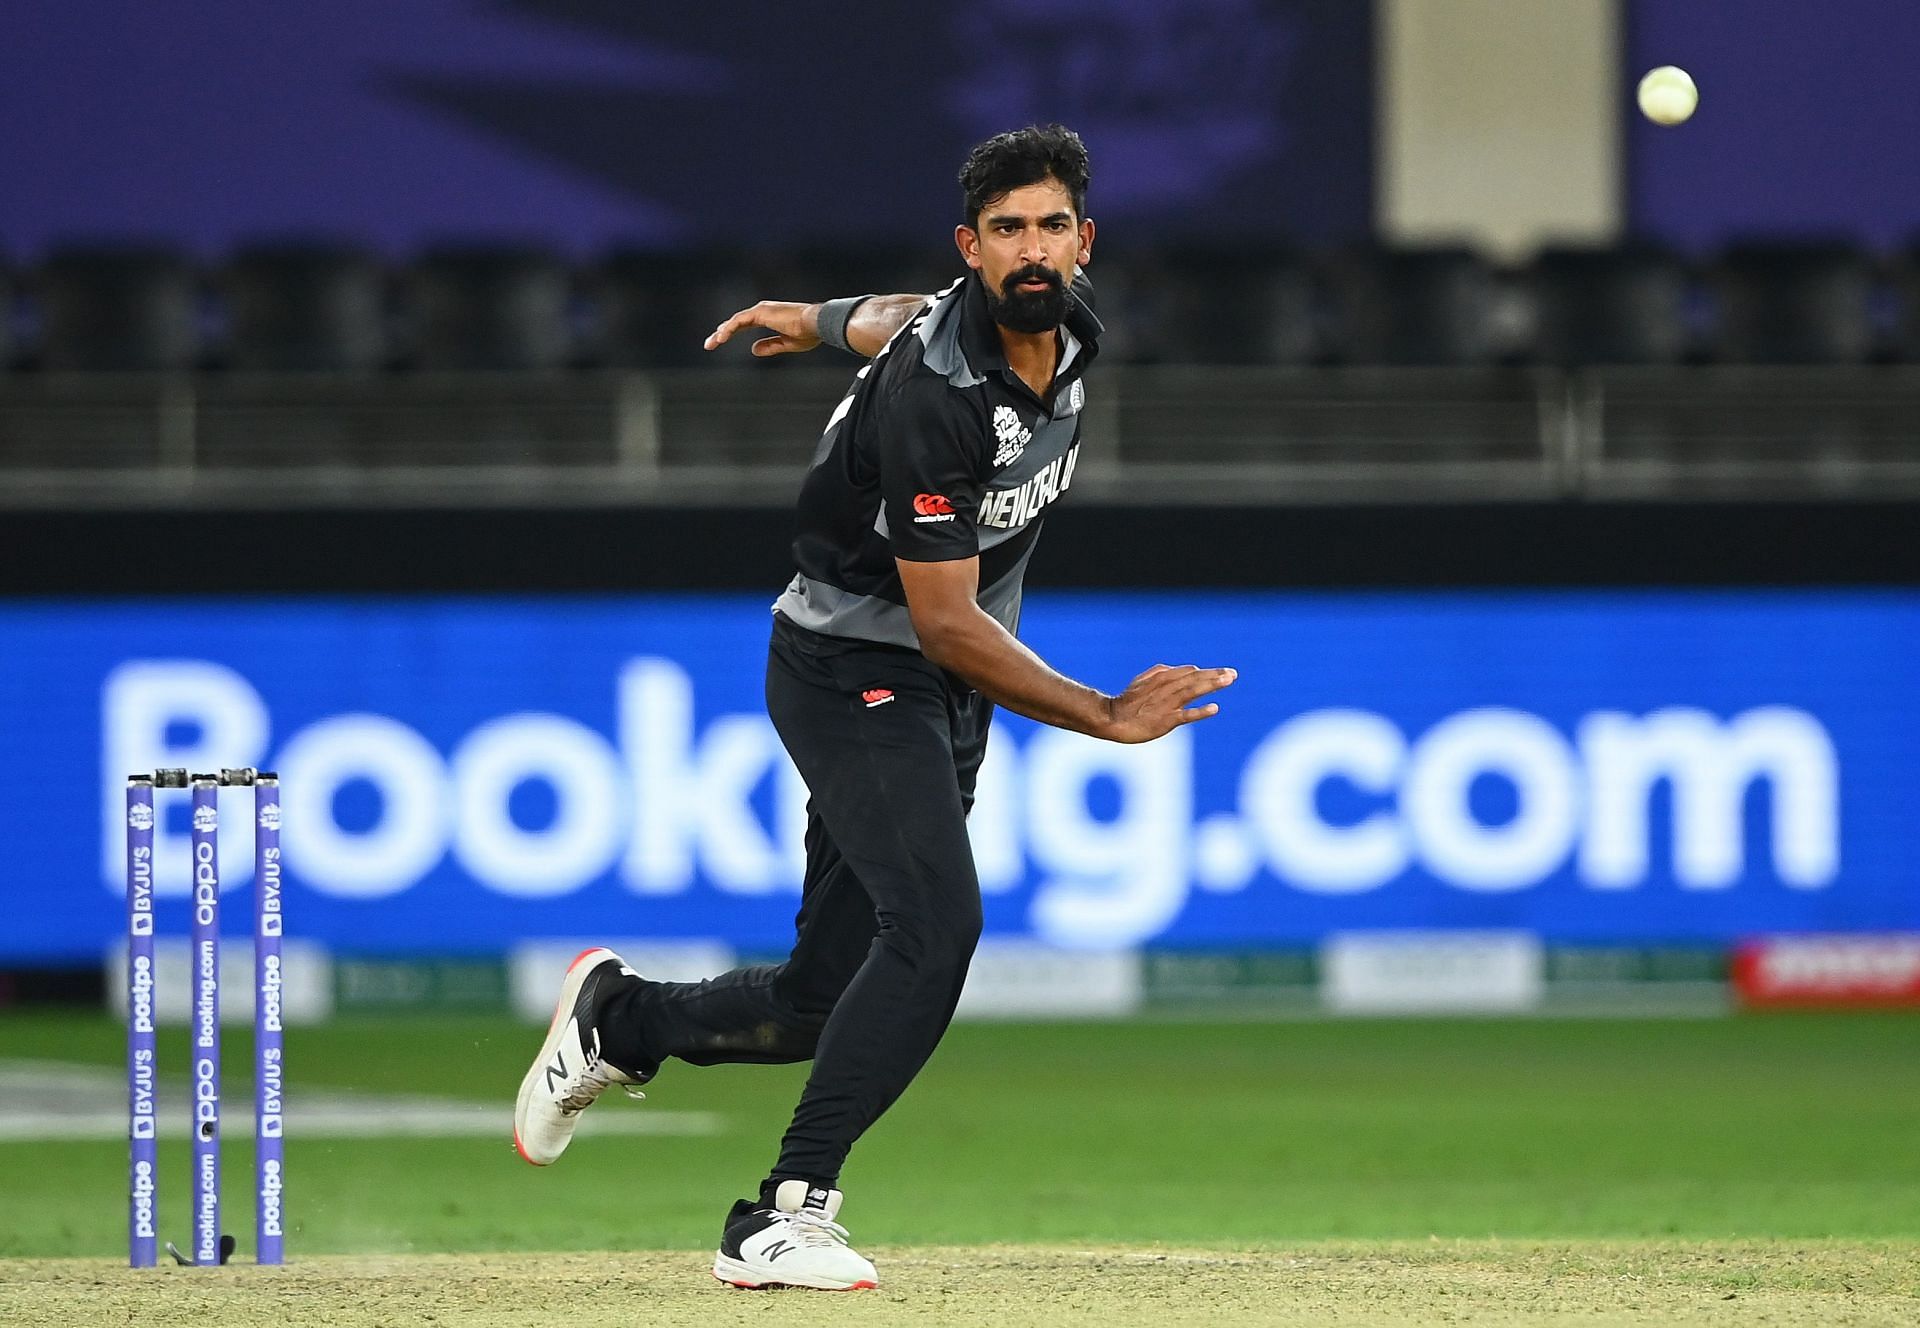 Ish Sodhi bamboozled the Indian batting lineup with his bag of tricks